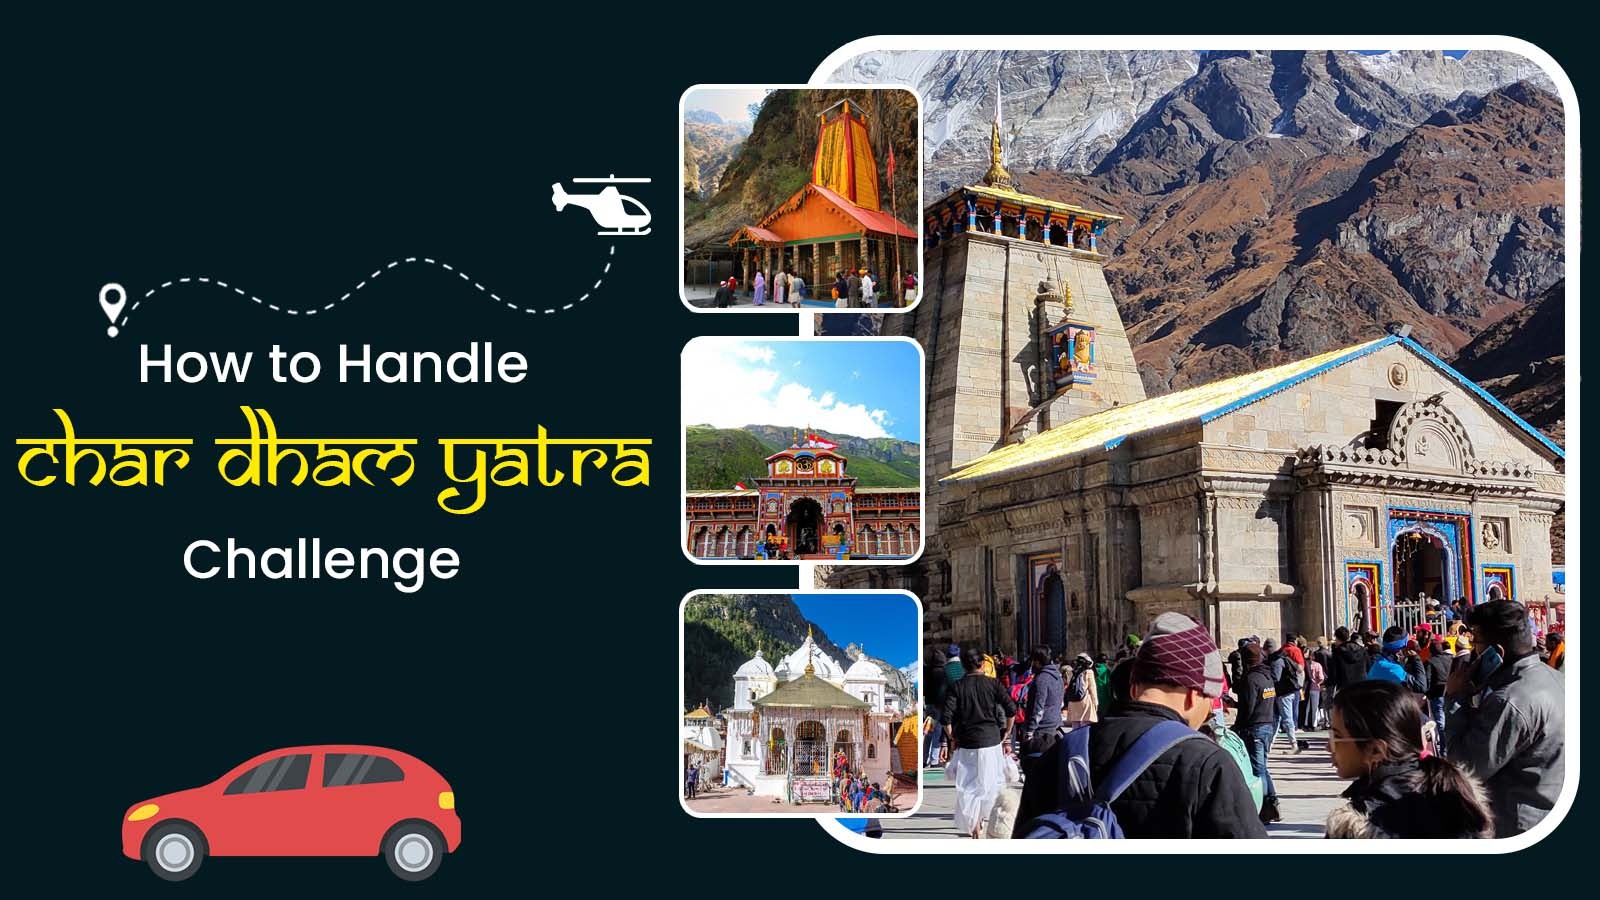 Handle Char Dham Yatra Challenge With Ease Using These Tips